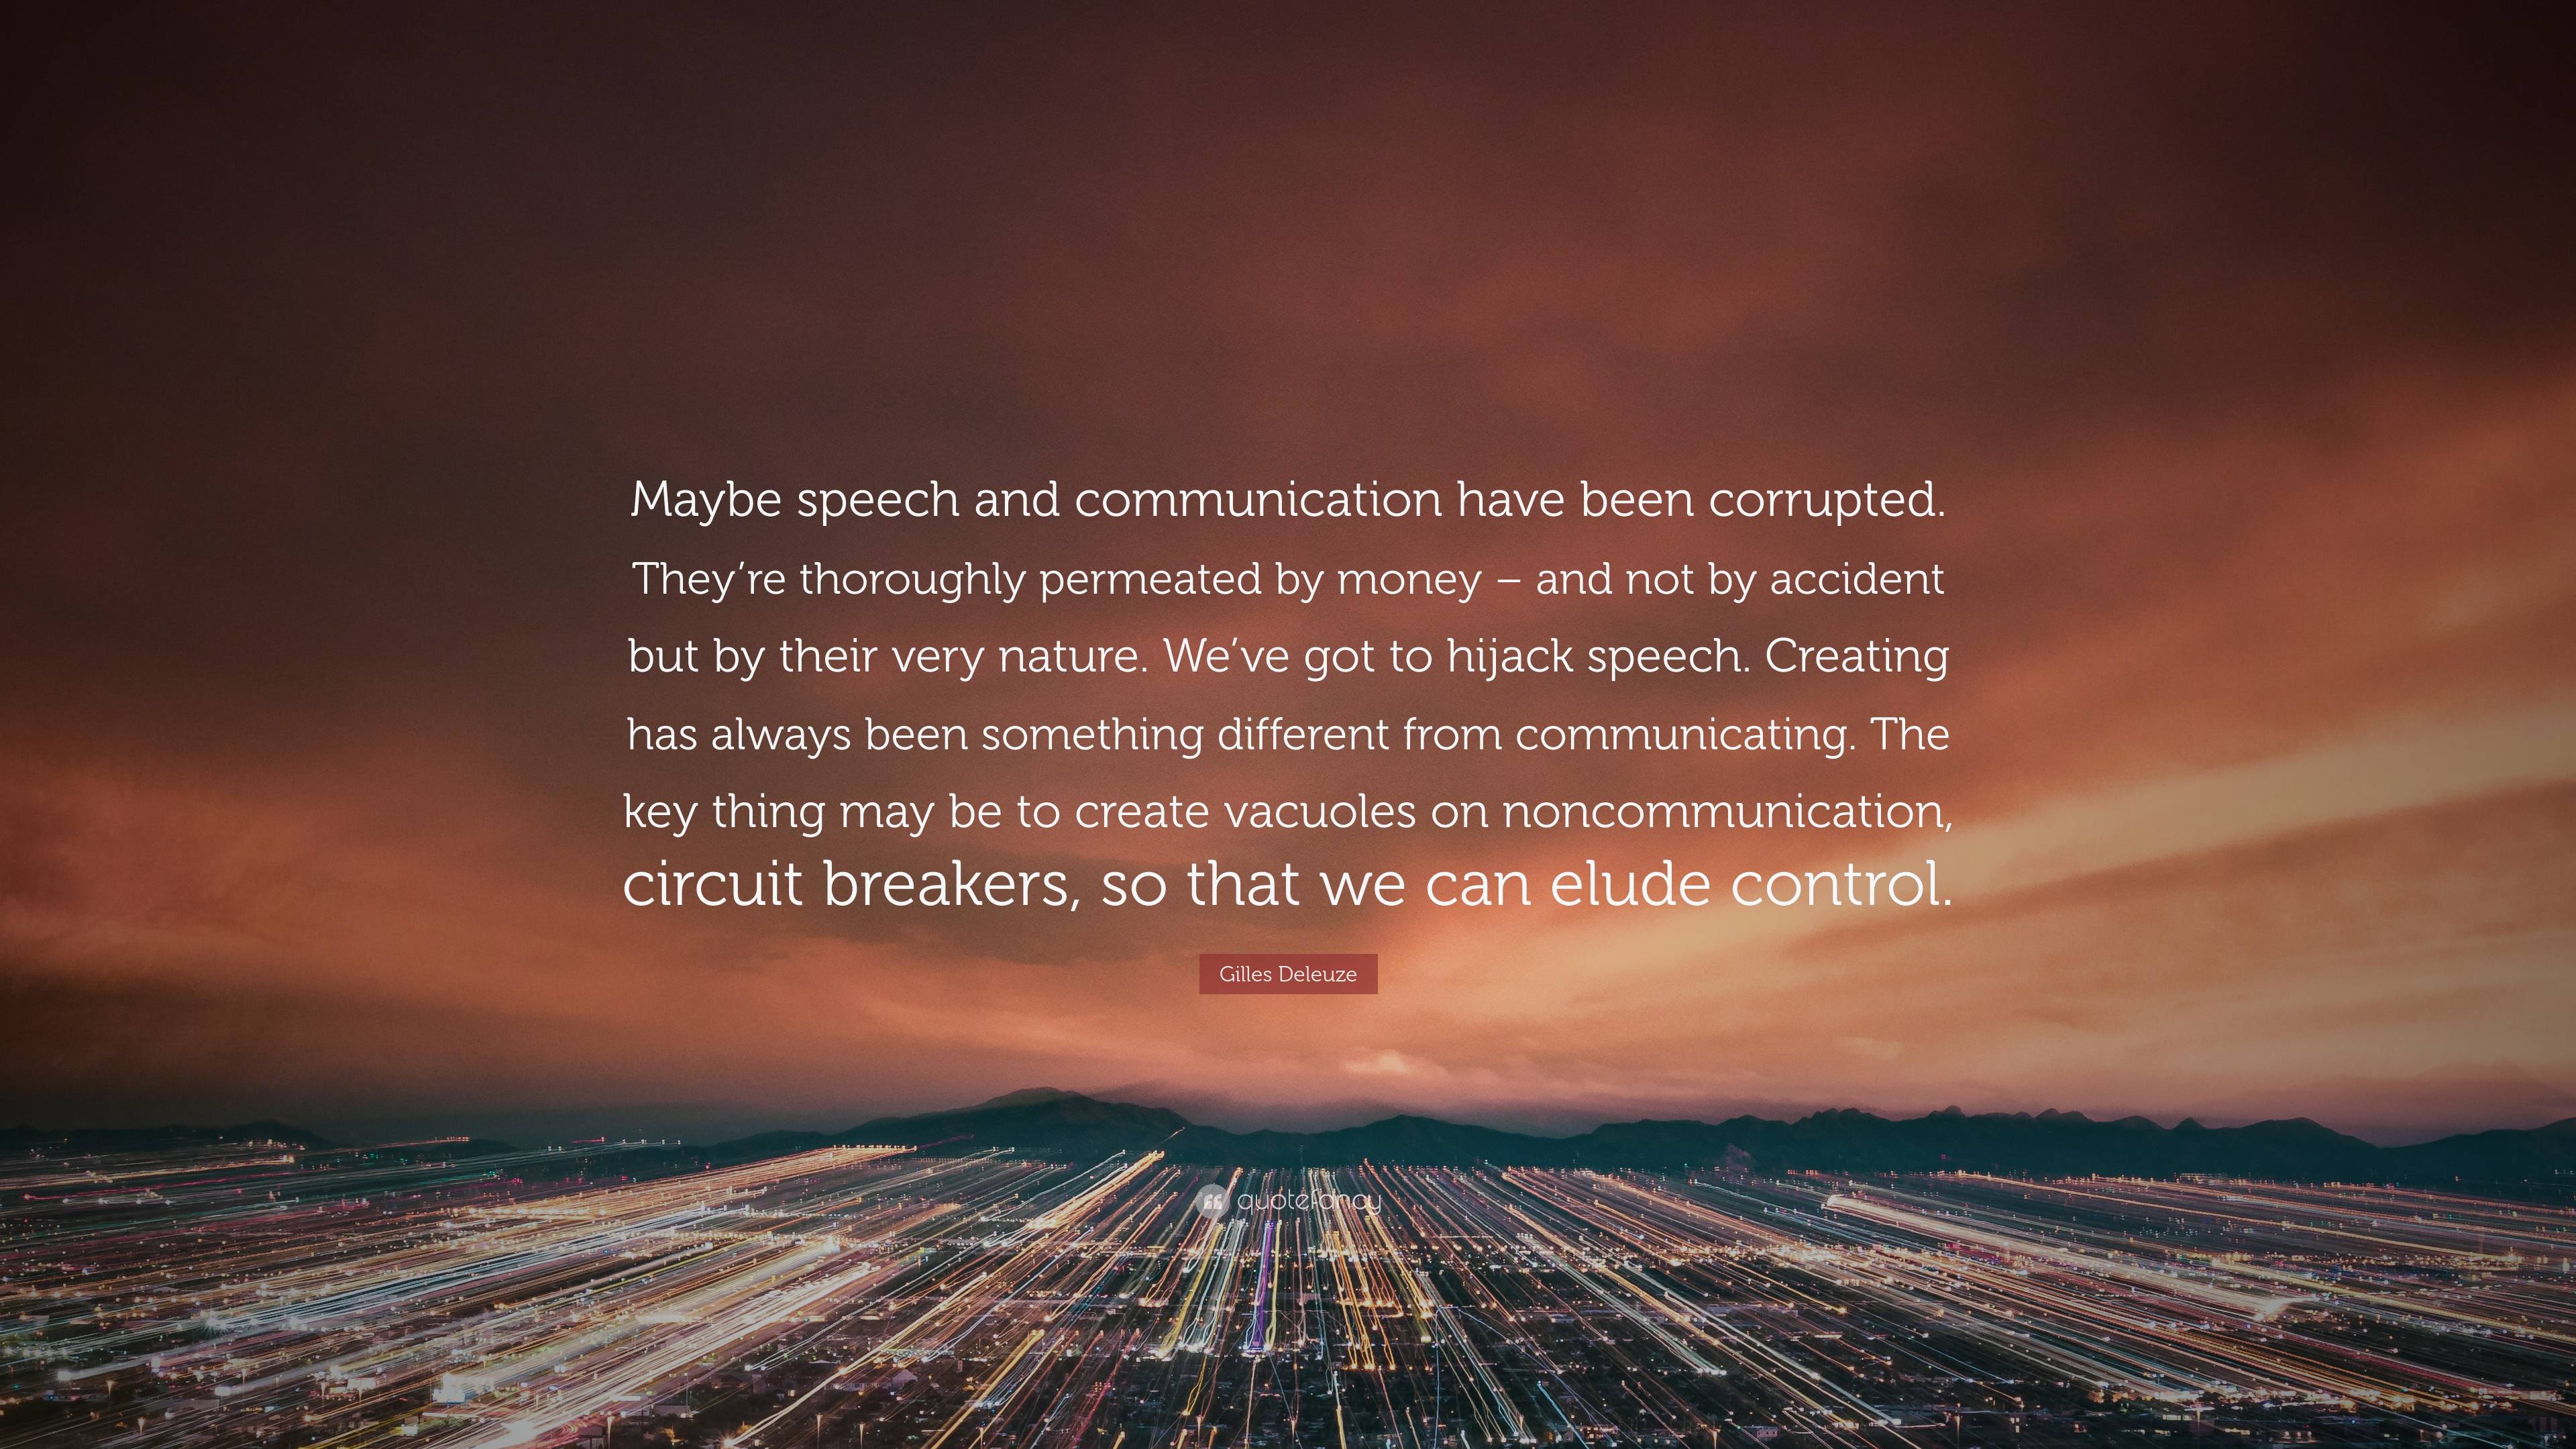 Gilles Deleuze Quote: “Maybe speech and communication have been ...